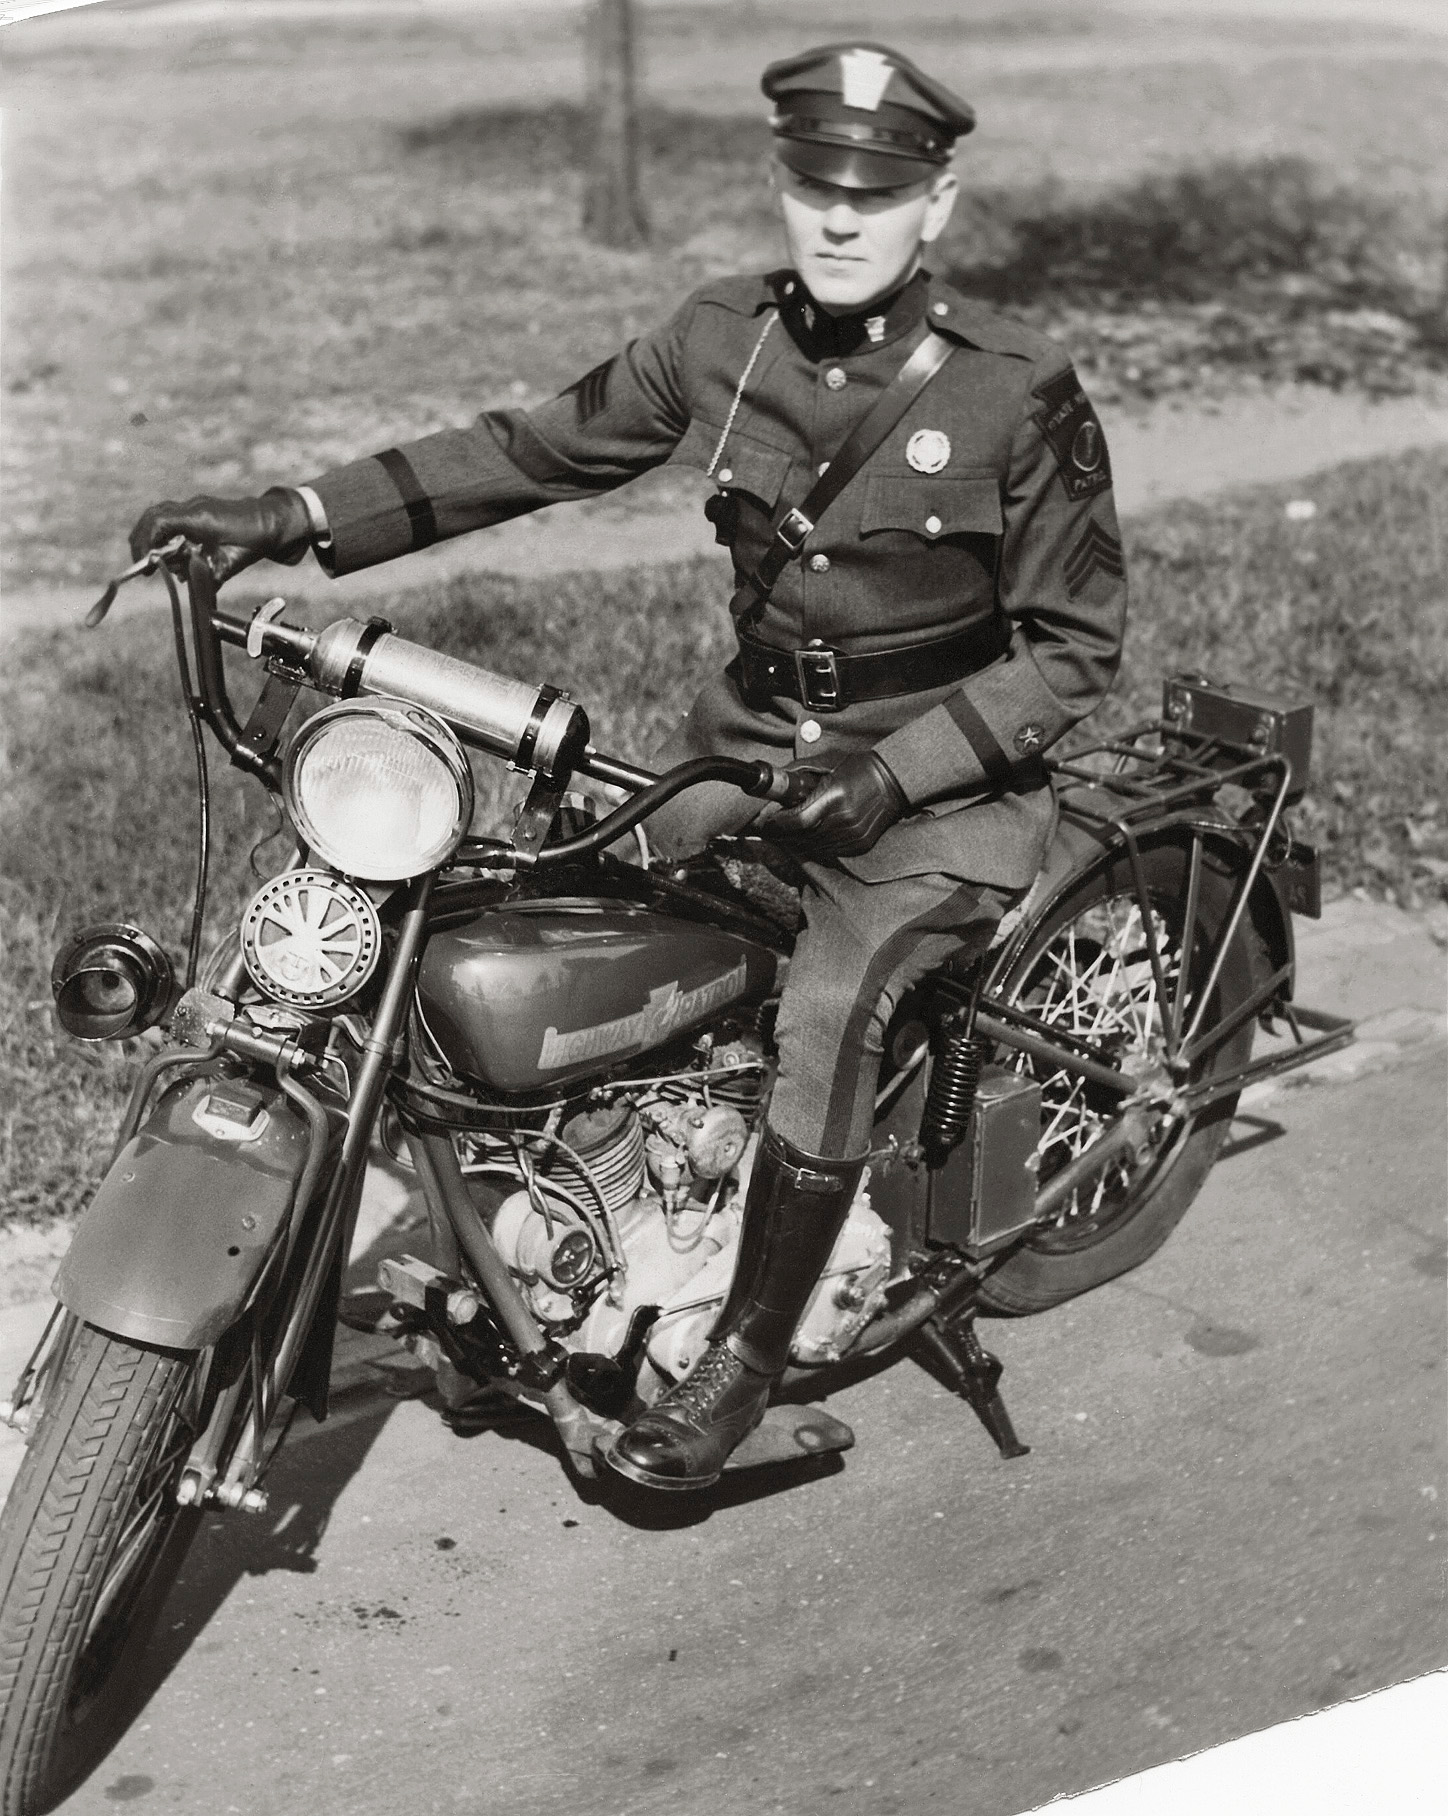 My grandfather,  H. K. Gemmill, member of the Pennsylvania State Highway Patrol, which later became the PA State Police. On an Indian Motorcycle, taken in 1932. View full size.